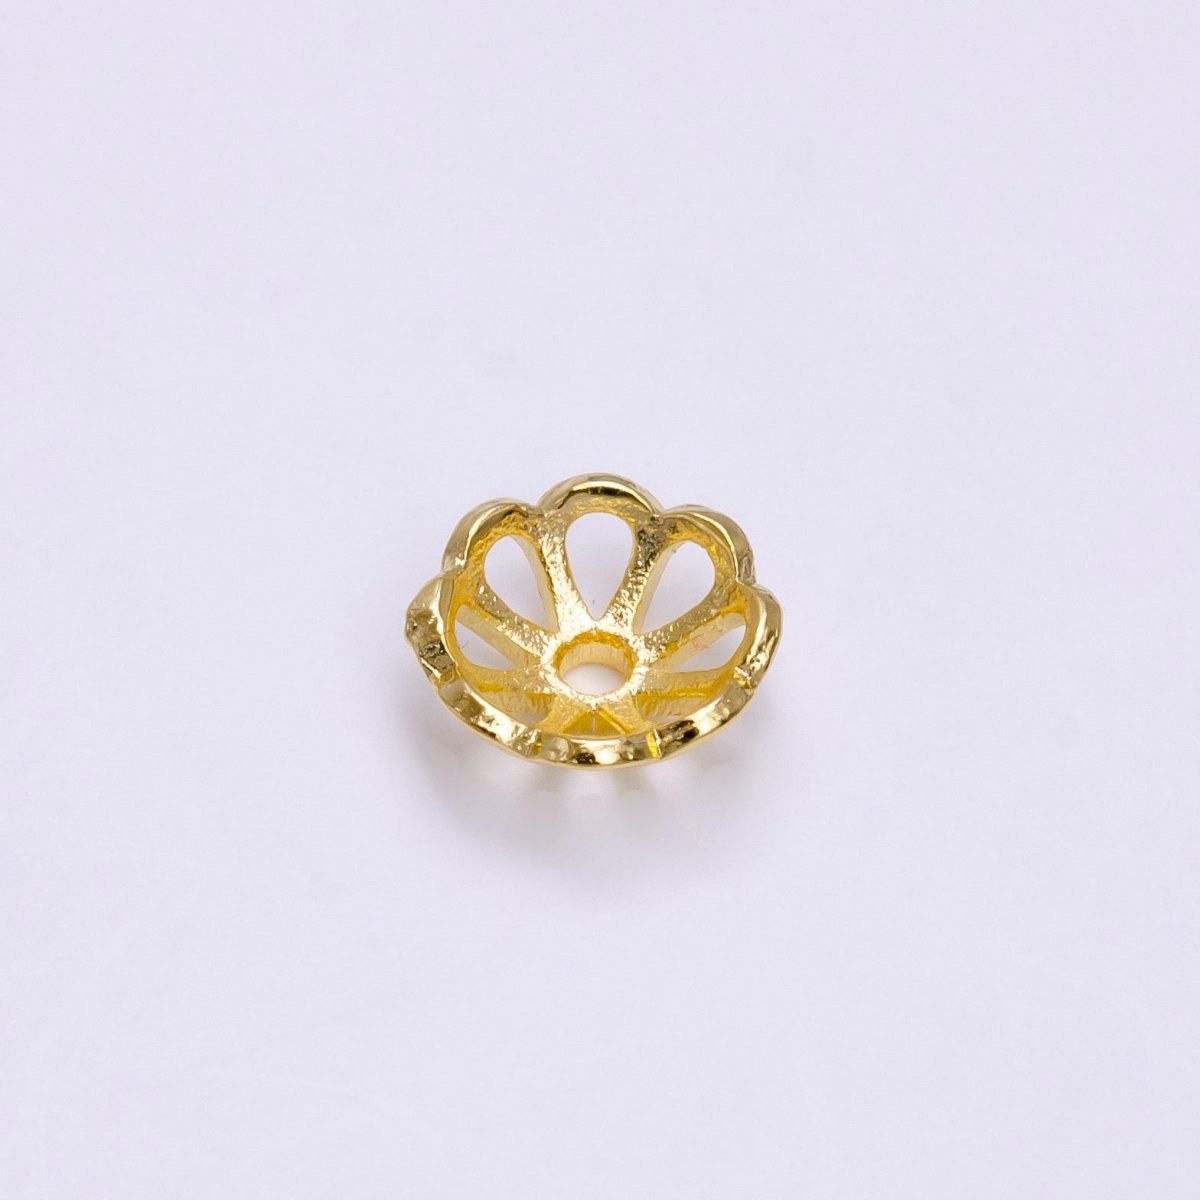 8mm Gold Filled Flower Bead Cap, Dainty Floral Bead Toppers, Bead Making Supply Z-920 - DLUXCA